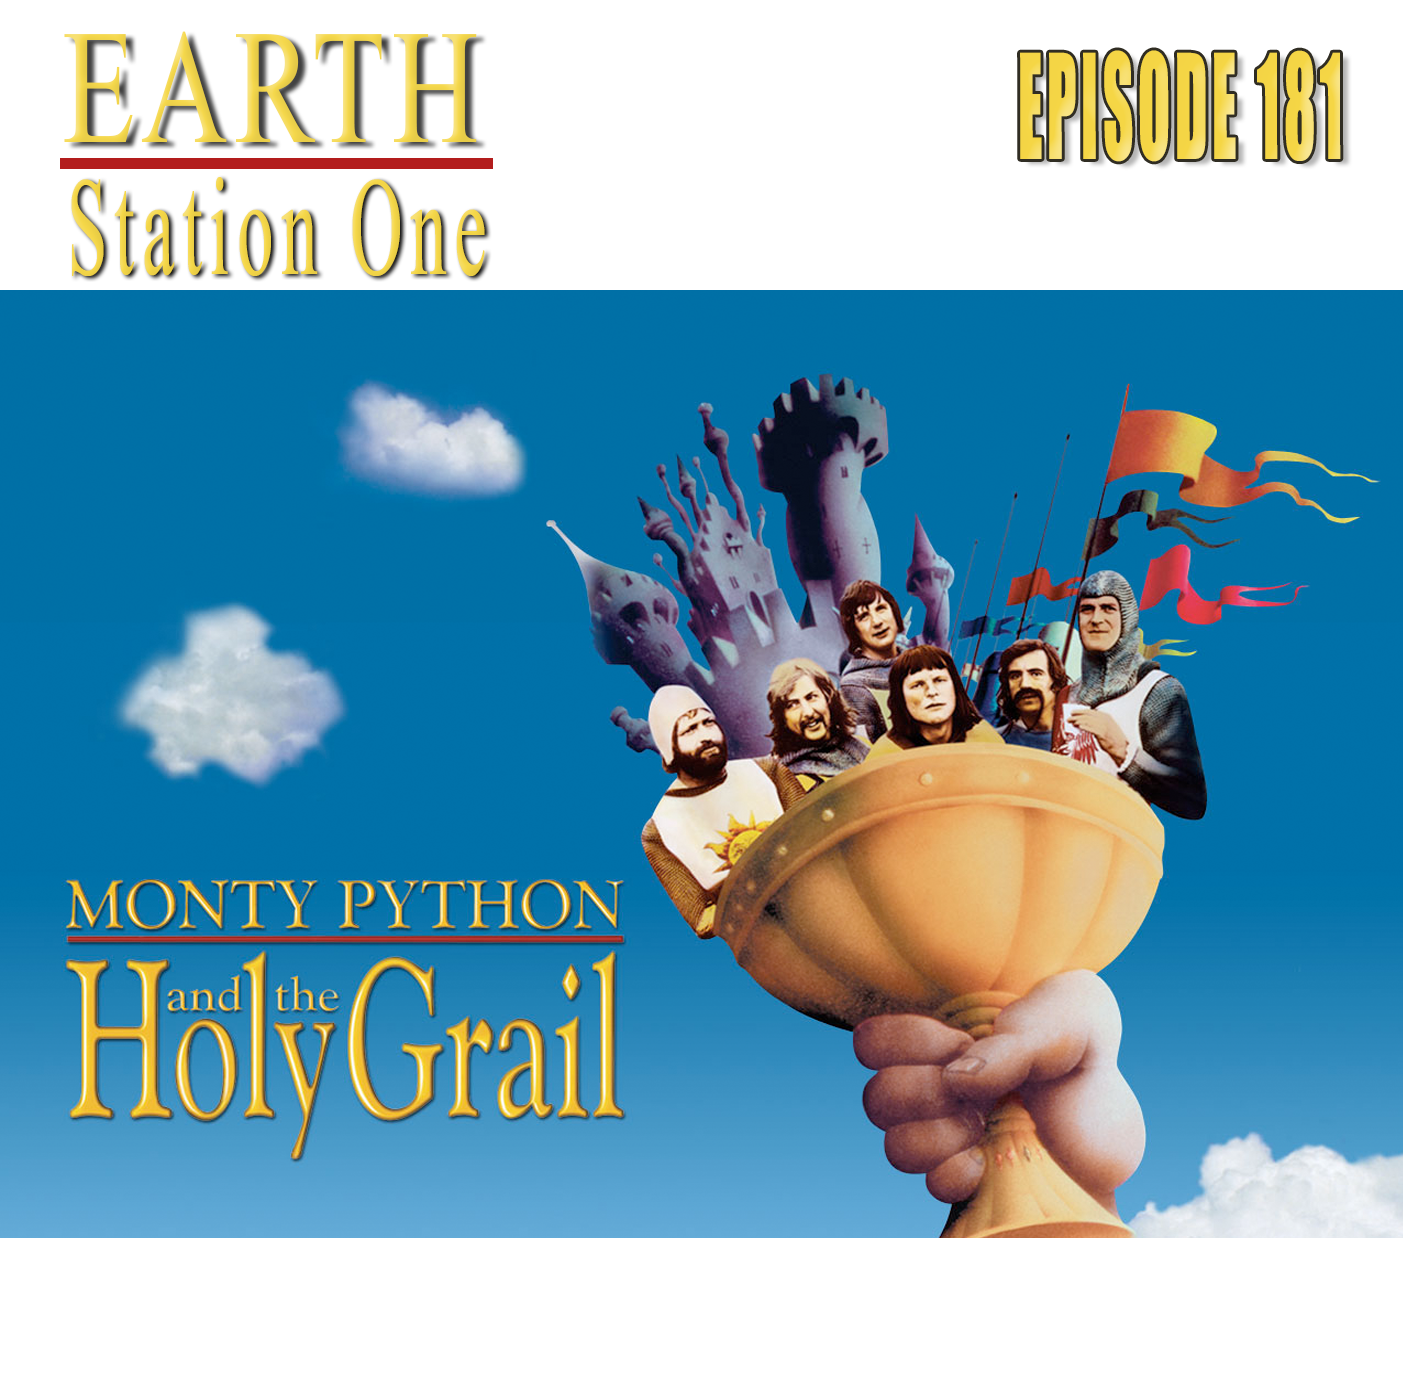 Earth Station One Episode 181